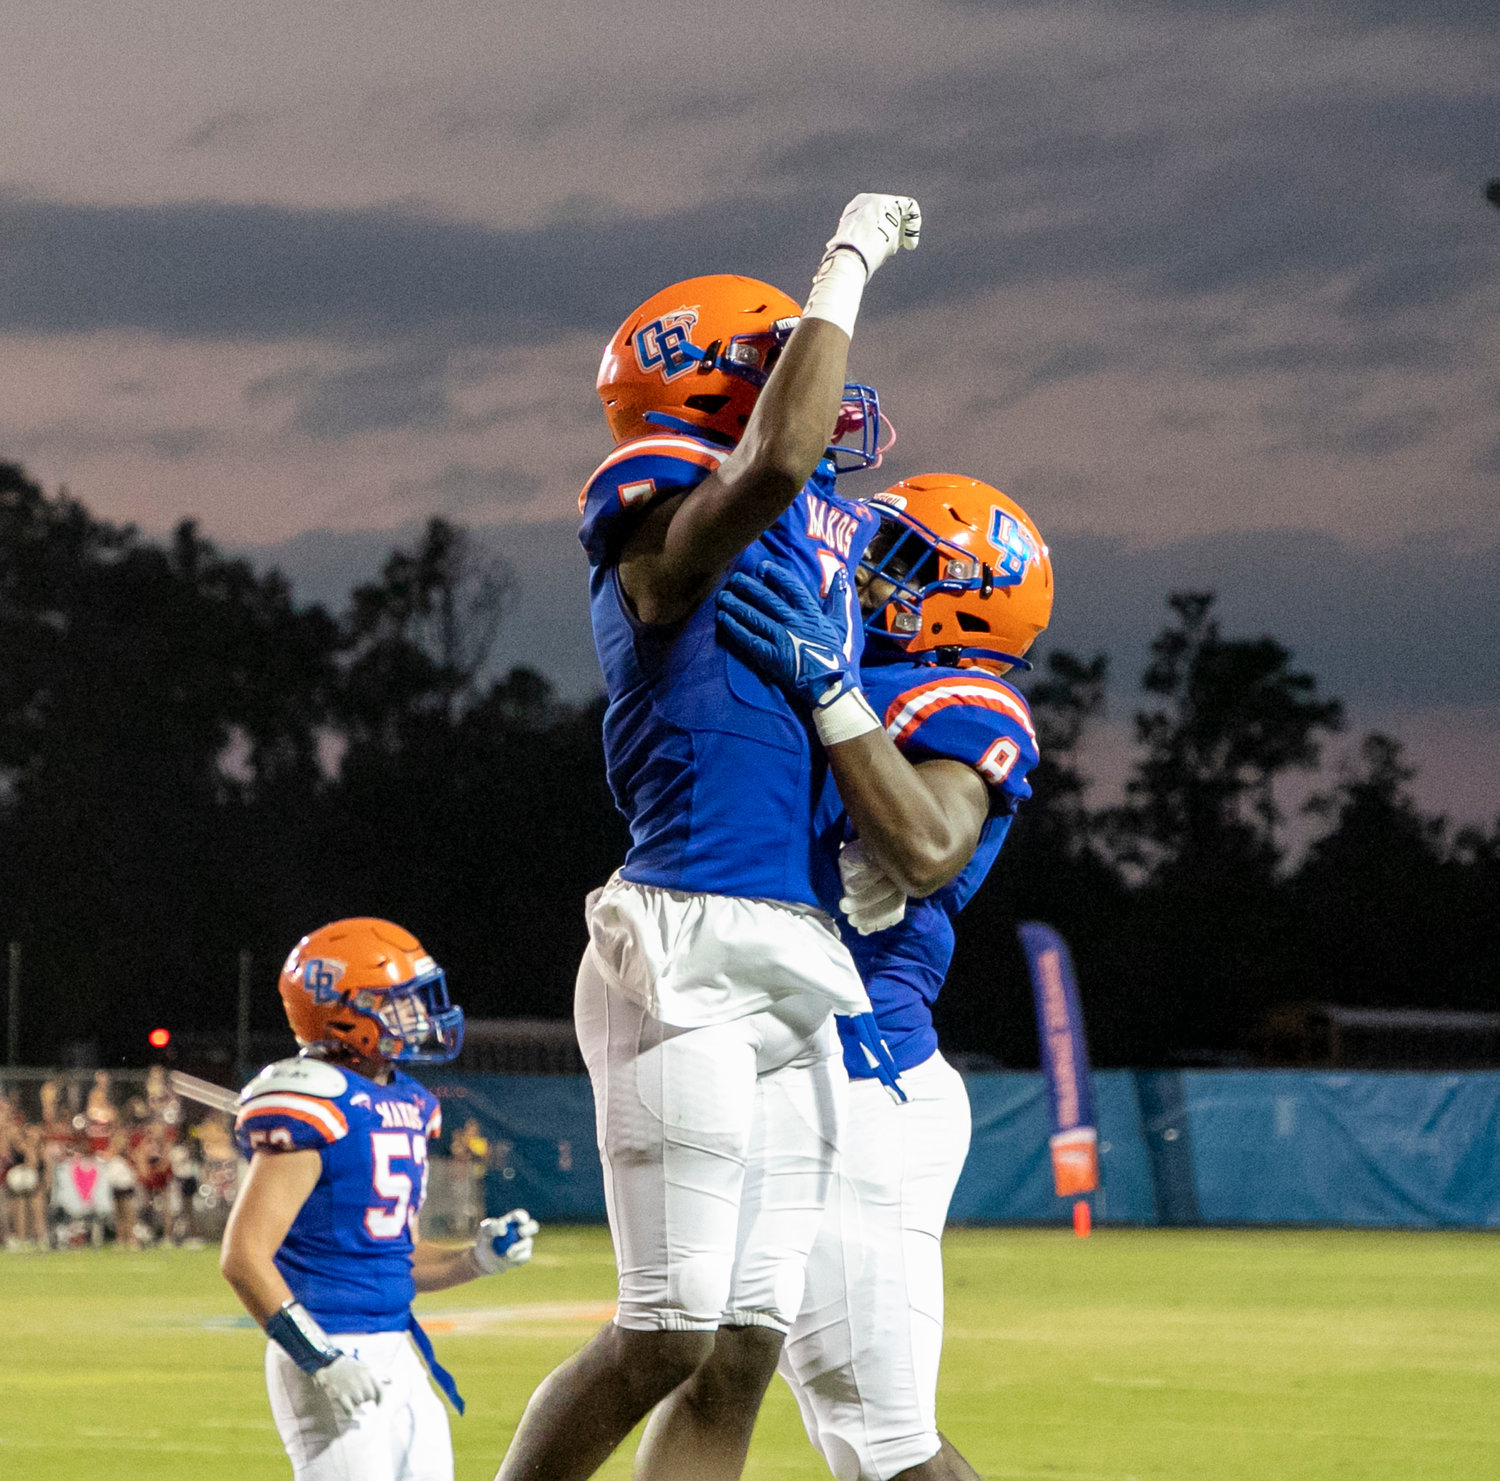 Orange Beach seniors Chris Pearson (7) and Lamar Nelson (8) celebrates Pearson’s rushing touchdown during the Makos’ region game against the T.R. Miller Tigers at home Sept. 16. Orange Beach travels to face Bayside Academy in another key region game this Friday night.